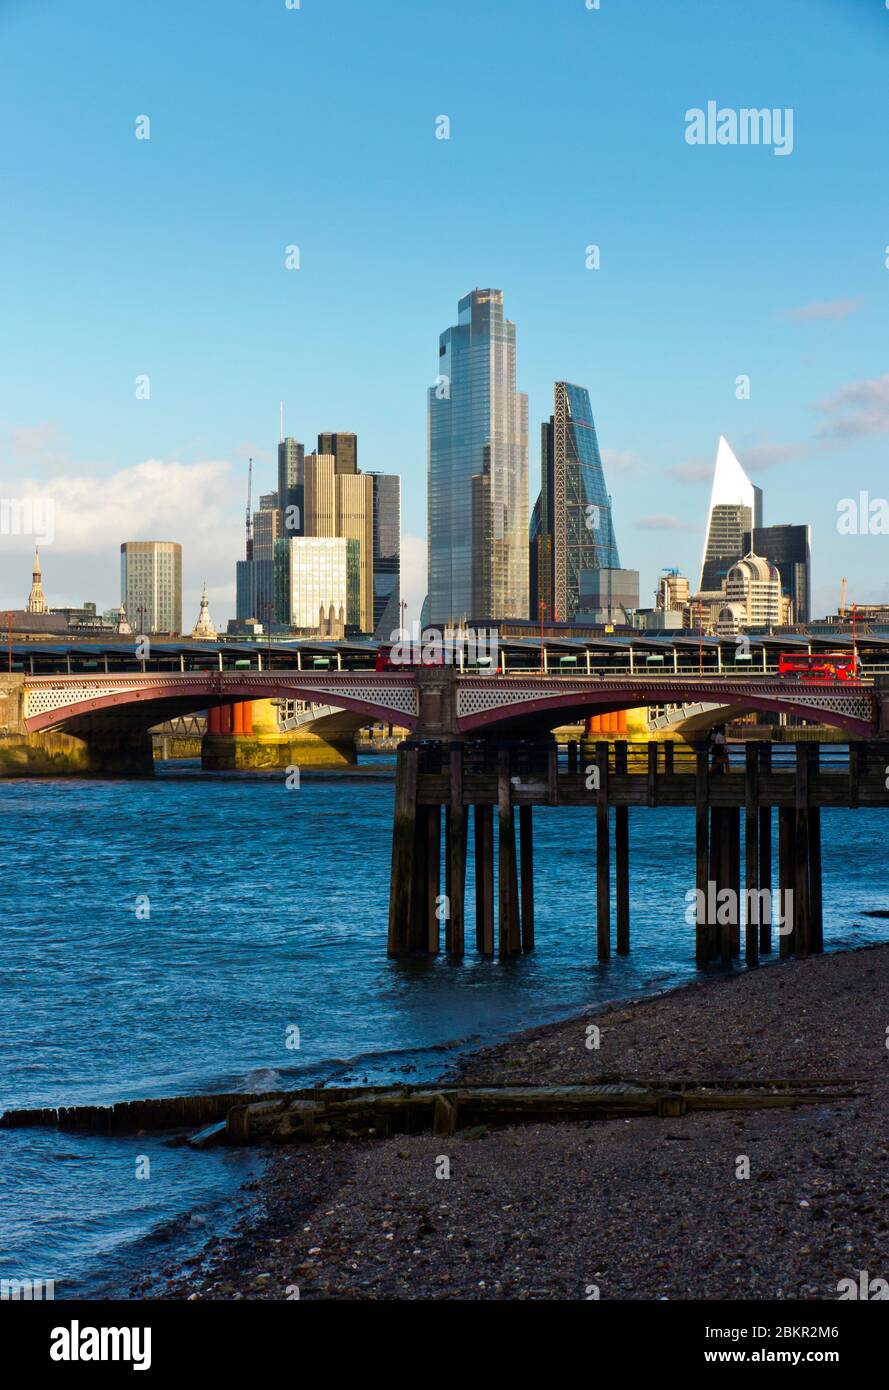 The City of London financial district skyline with Blackfriars Bridge and the River Thames in the foreground London England UK Stock Photo